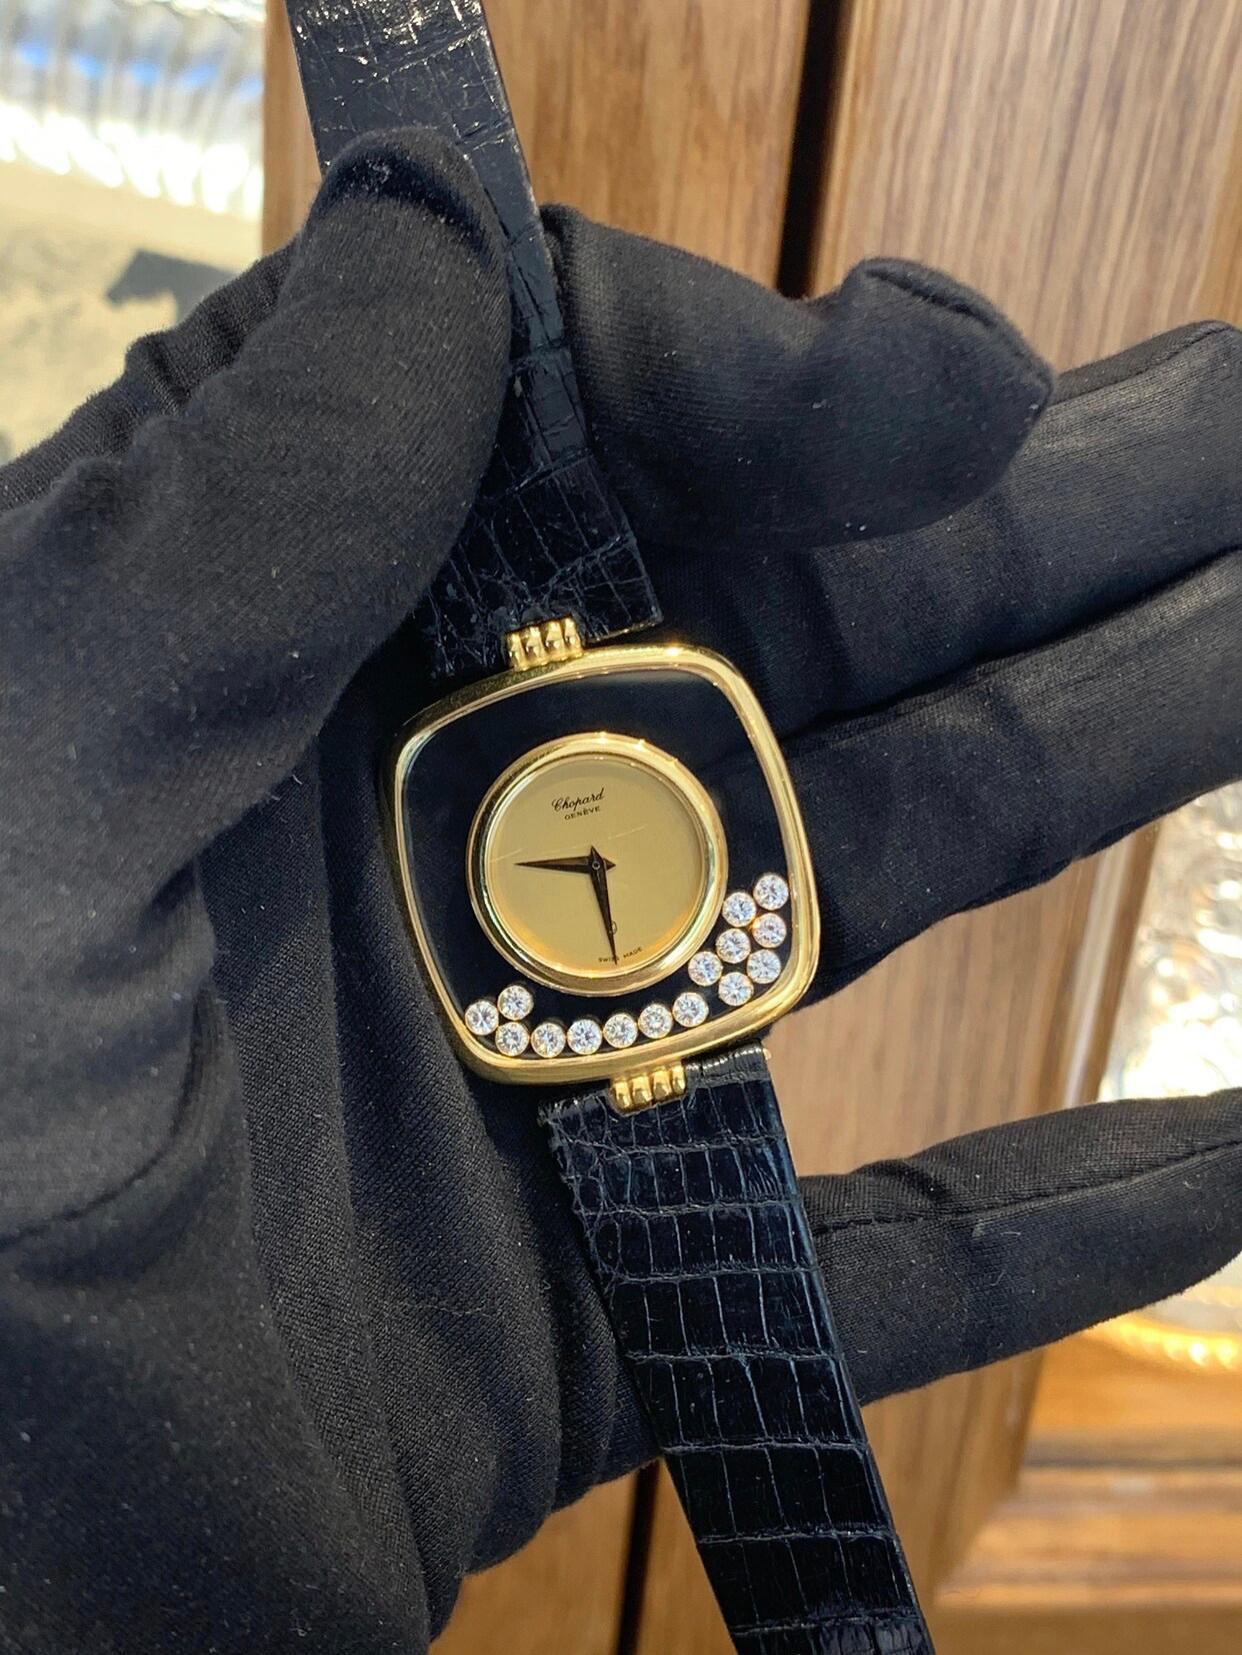 Chopard Happy Diamonds, Swiss Made, In Solid 18k Yellow Gold, Factory Set With Diamonds.
15 Floating Diamonds.
Factory Leather Chopard Strap.
Factory Chopard 18k Yellow Gold Buckle.
Amazing Shine, Incredible Craftsmanship.
Great Statement